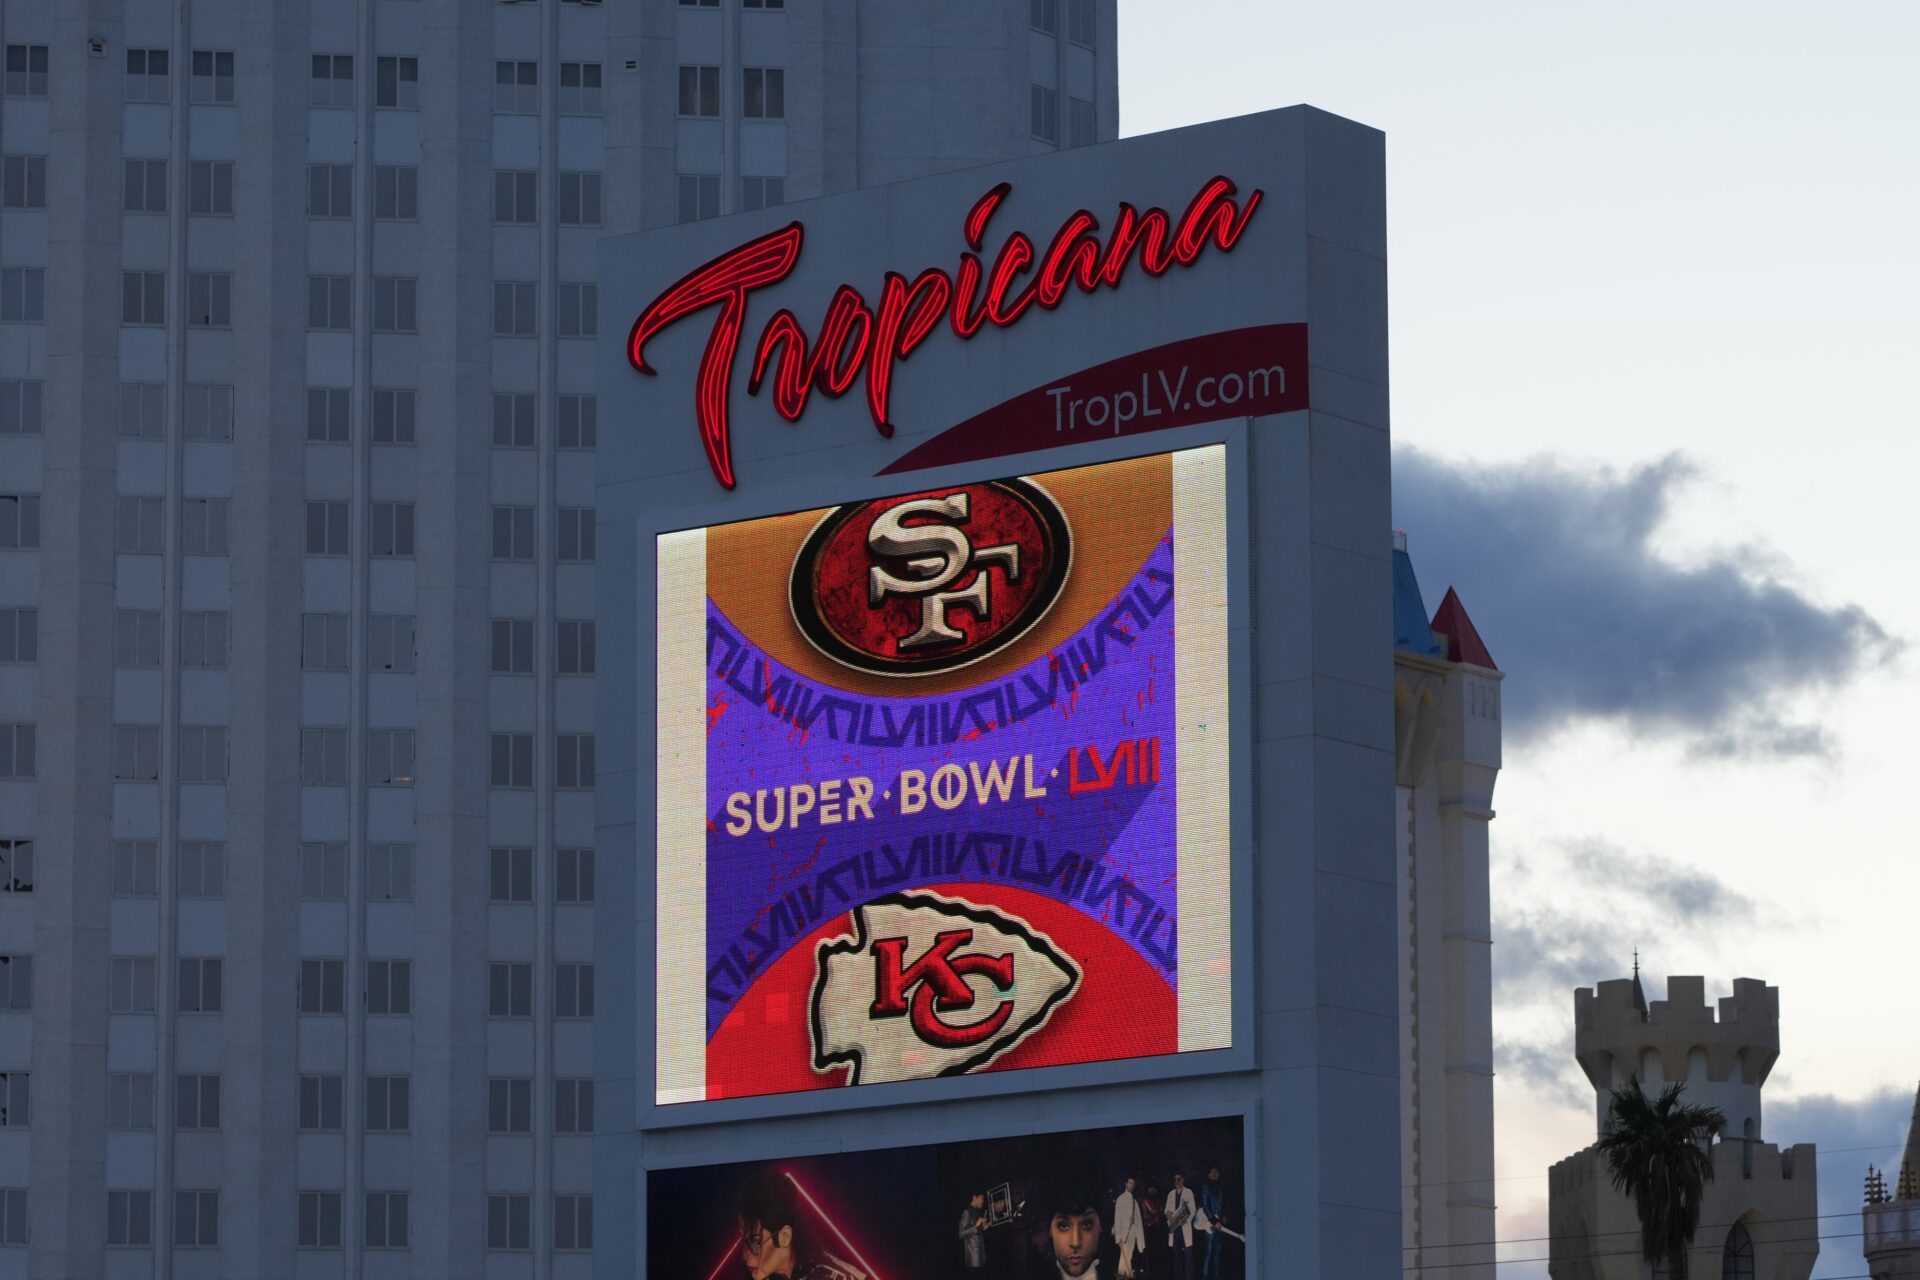 Signage promoting Super Bowl 58 between the San Francisco 49srs and the Kansas City Chiefs at the Tropicana hotel and casino on the strip.